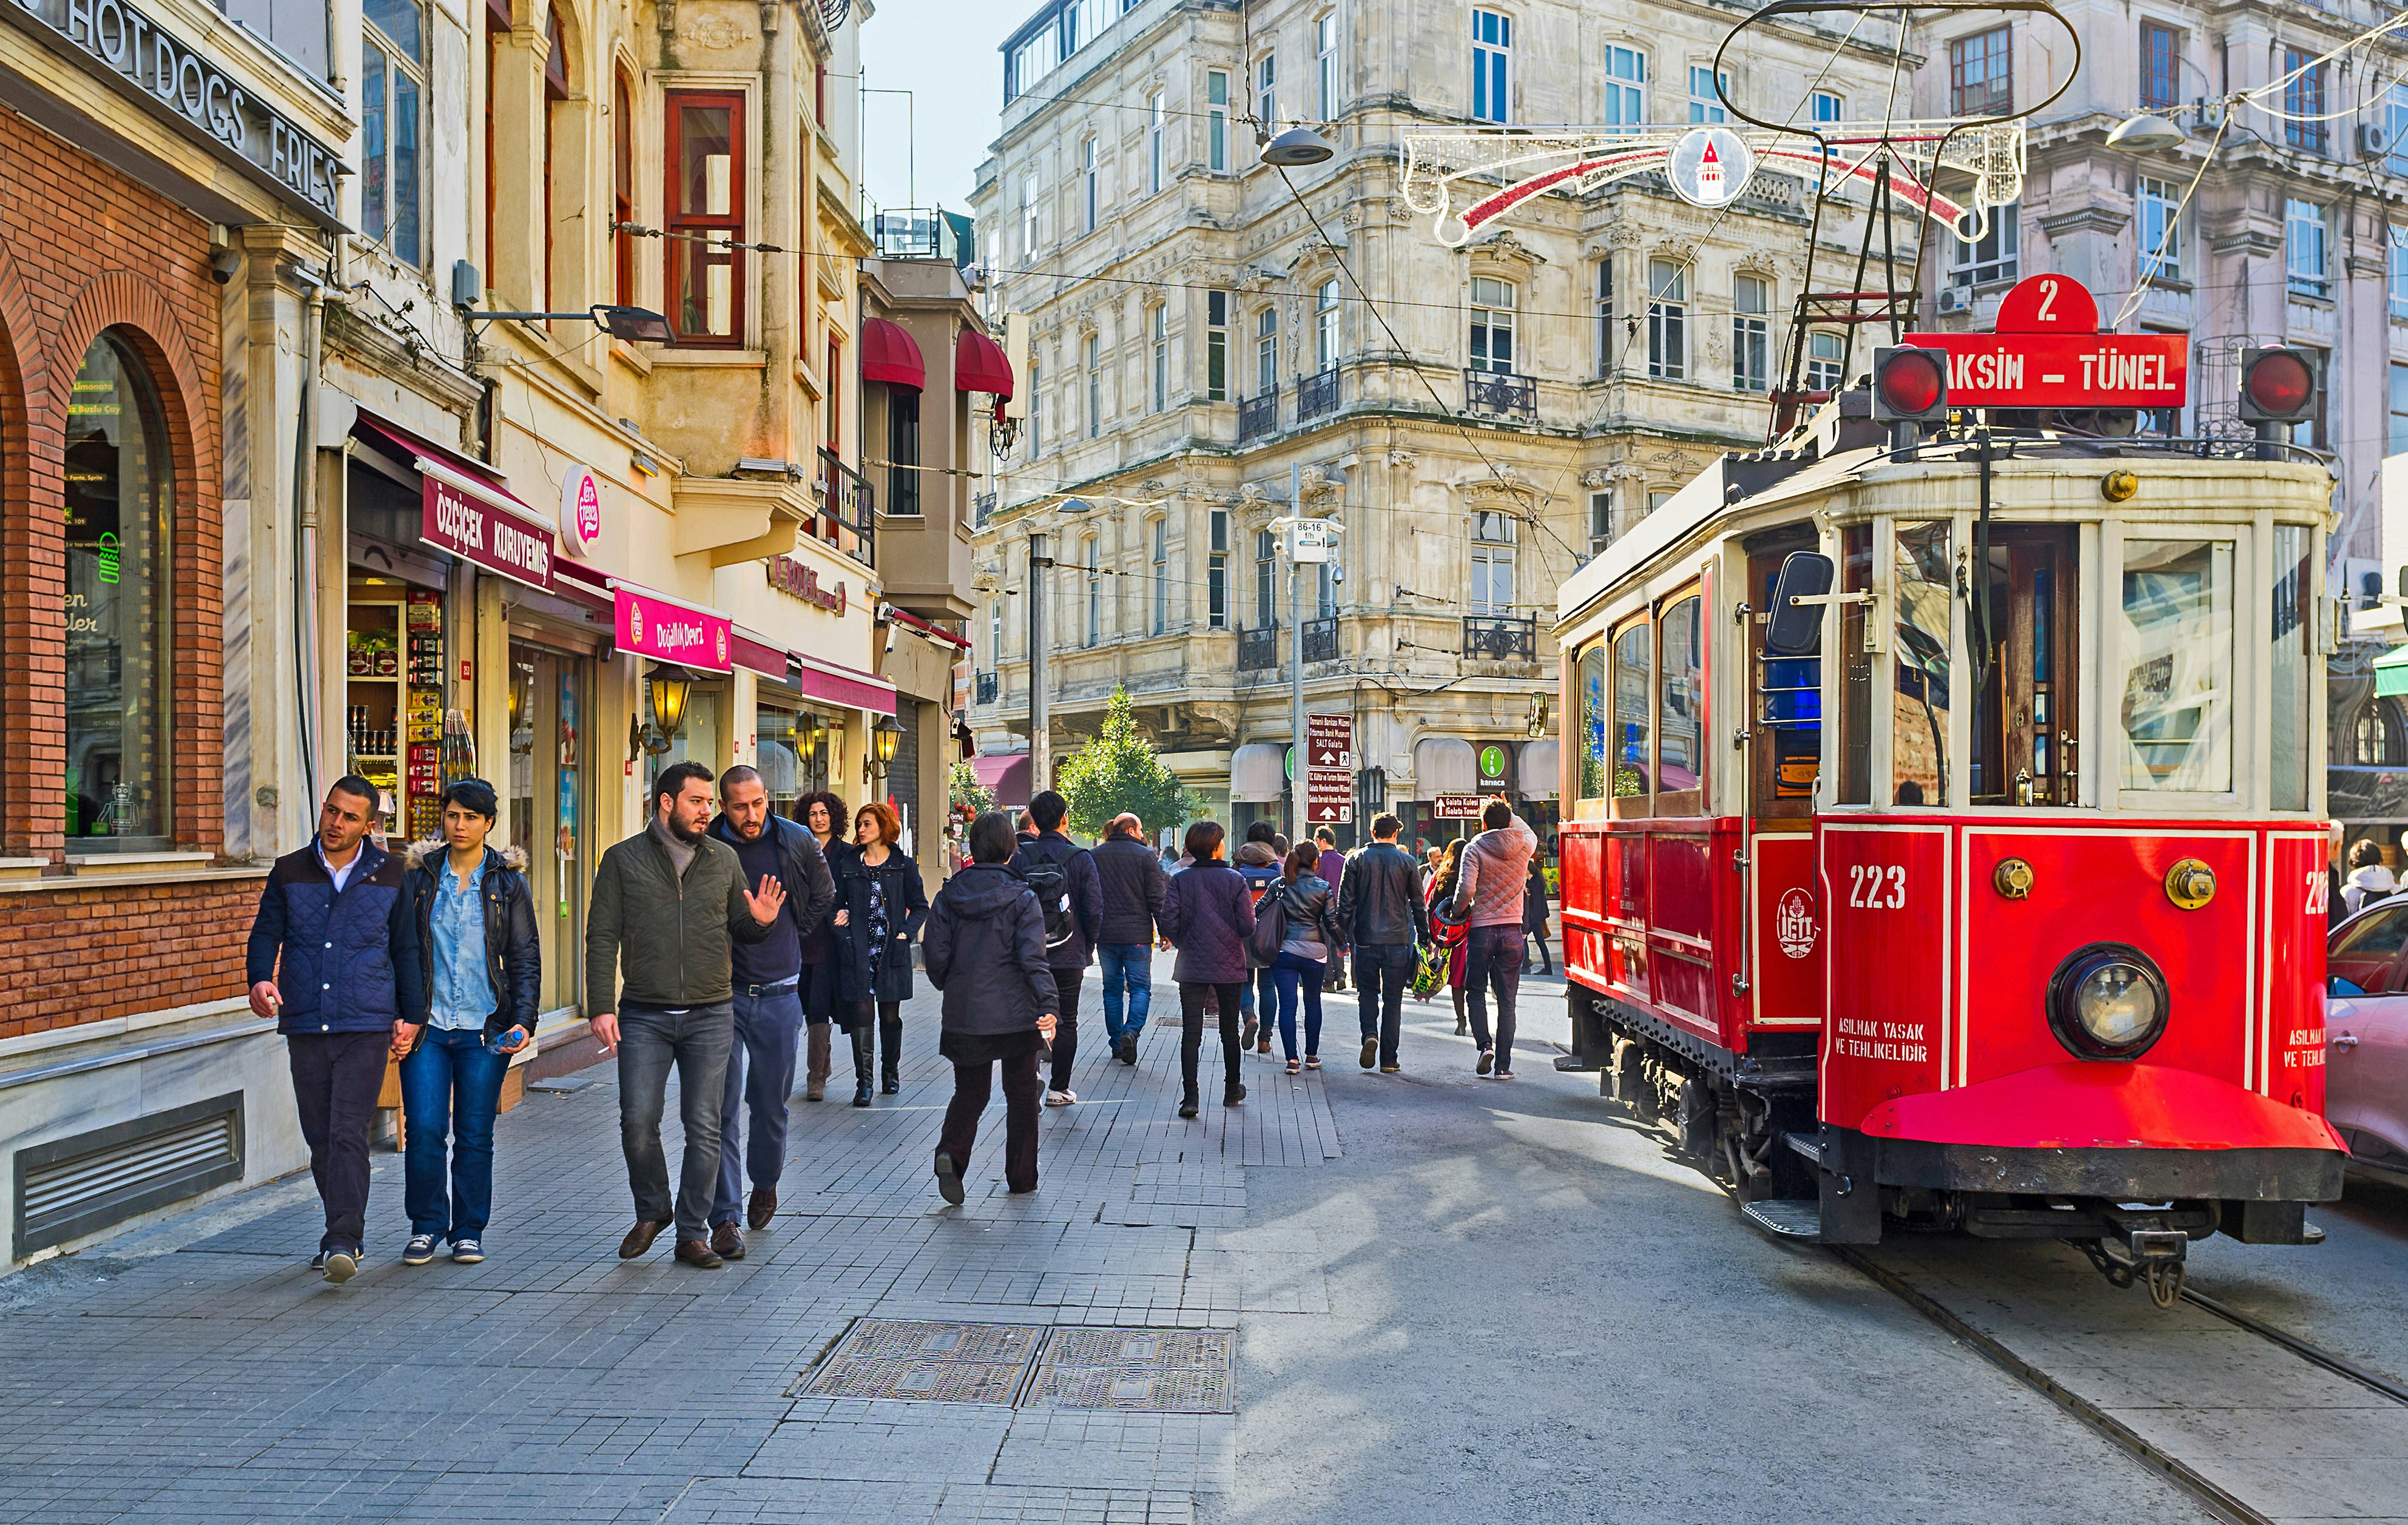 A bright red vintage tram is travelling down a pedestrian street; the pavement of the shopping street is busy with people.